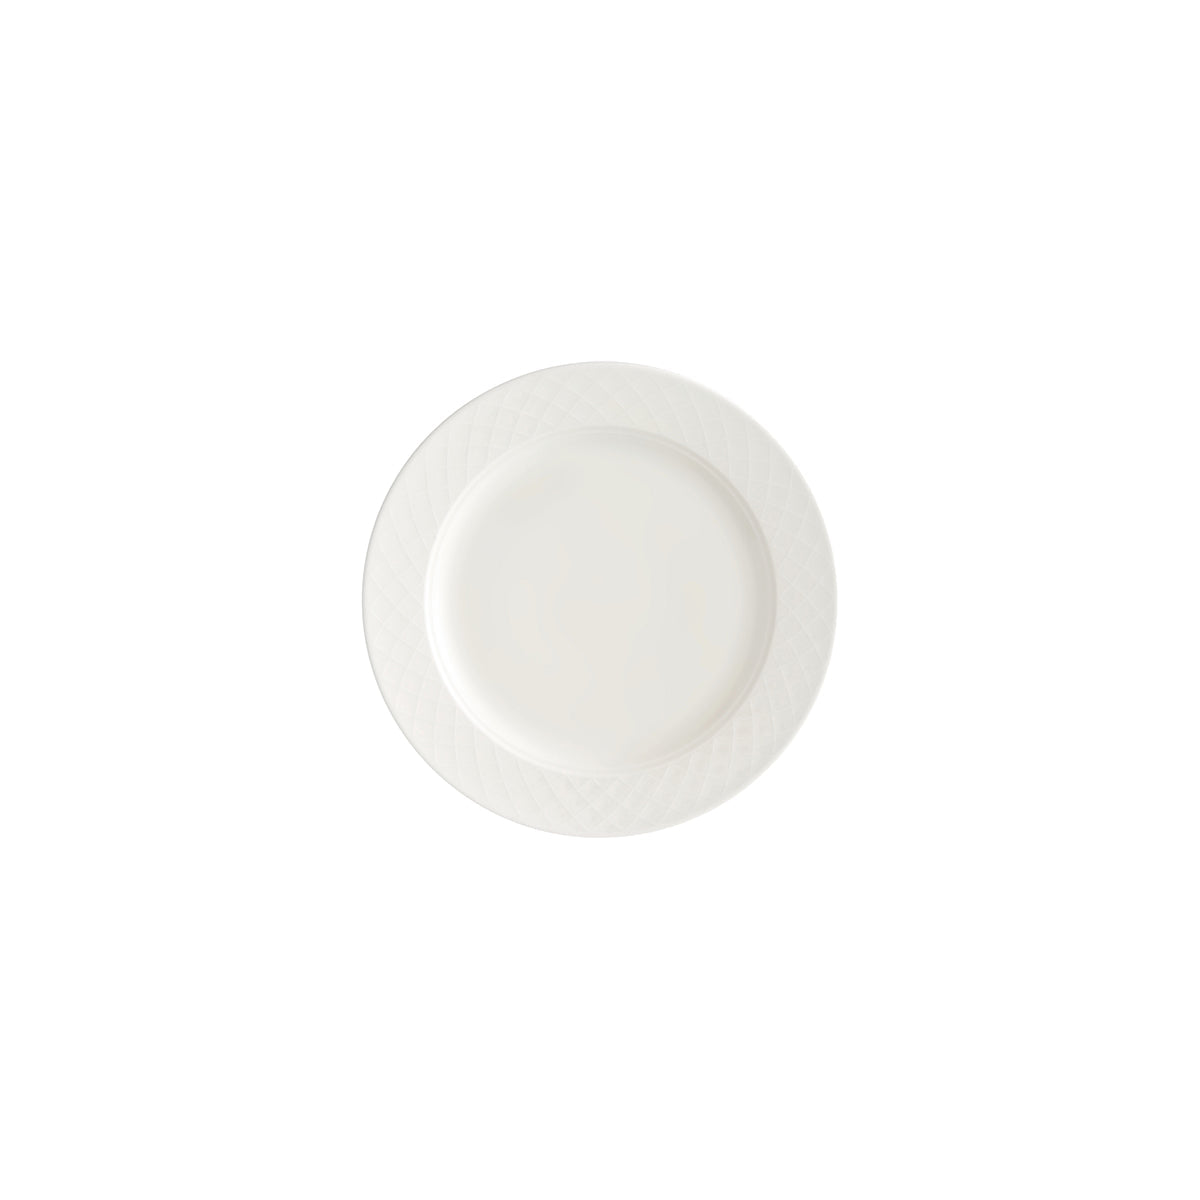 VB16-2238-2630 Villeroy And Boch Villeroy And Boch Bella White Plate Wide Rim 240mm Tomkin Australia Hospitality Supplies